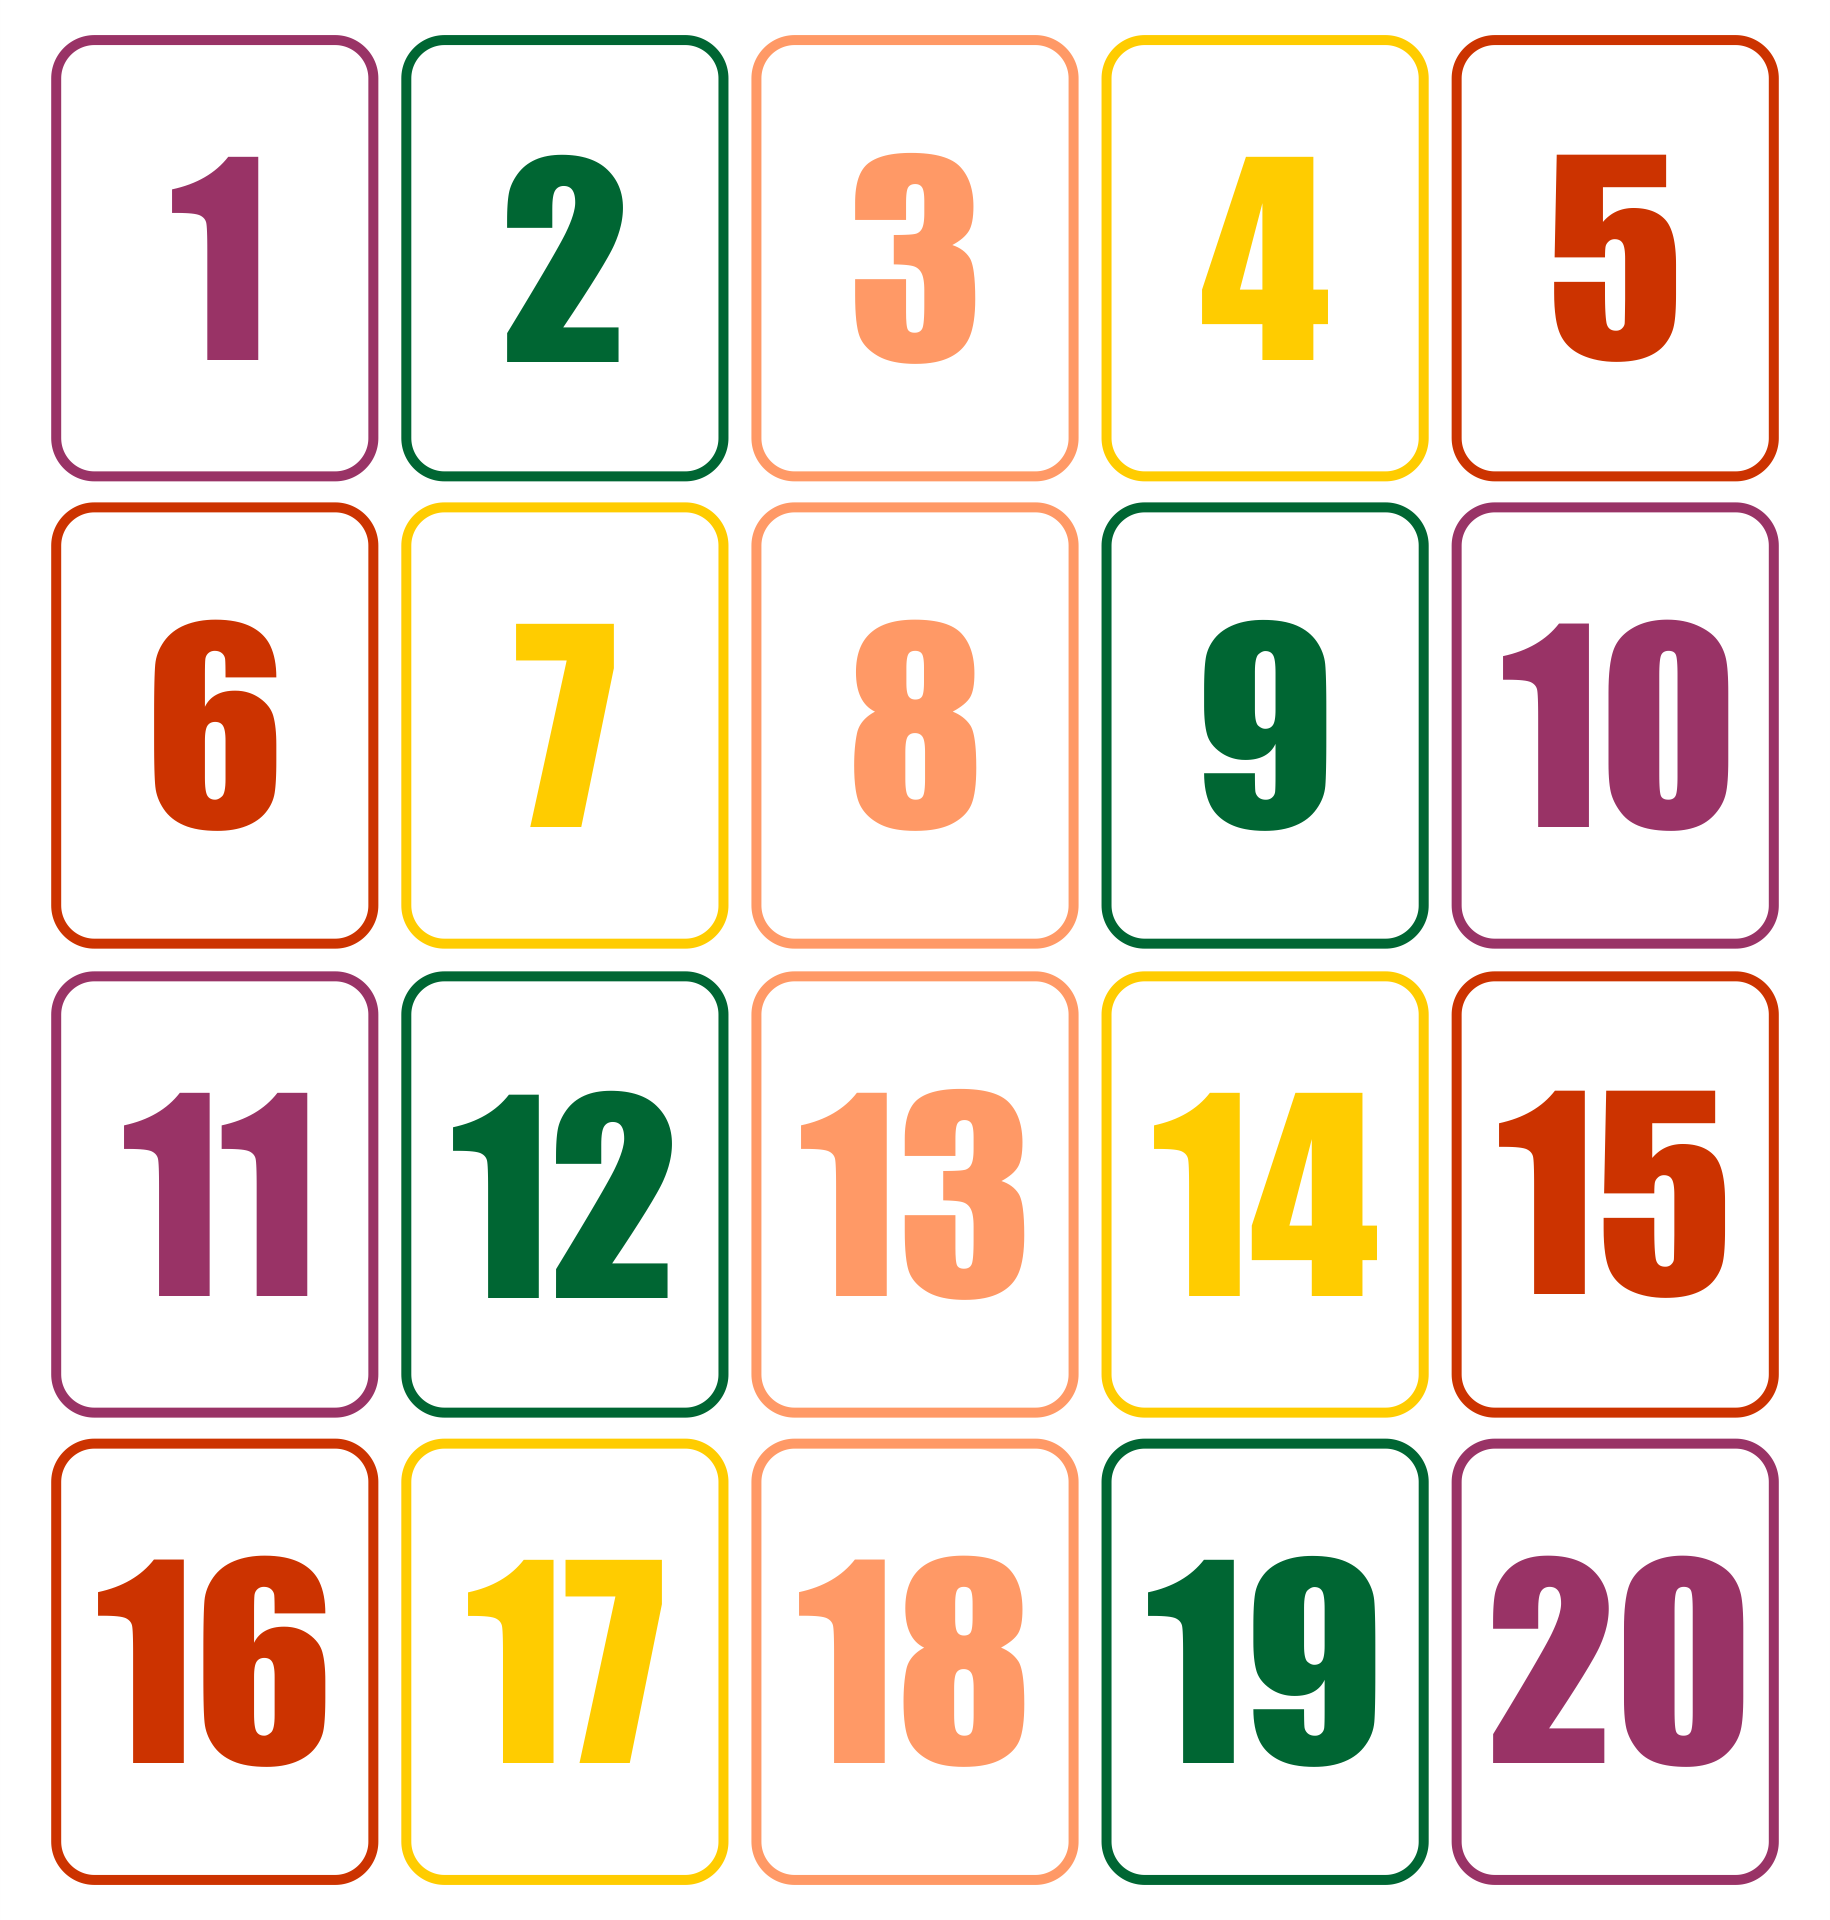 4 Best Images of Large Printable Number Cards 1 20 Printable Number